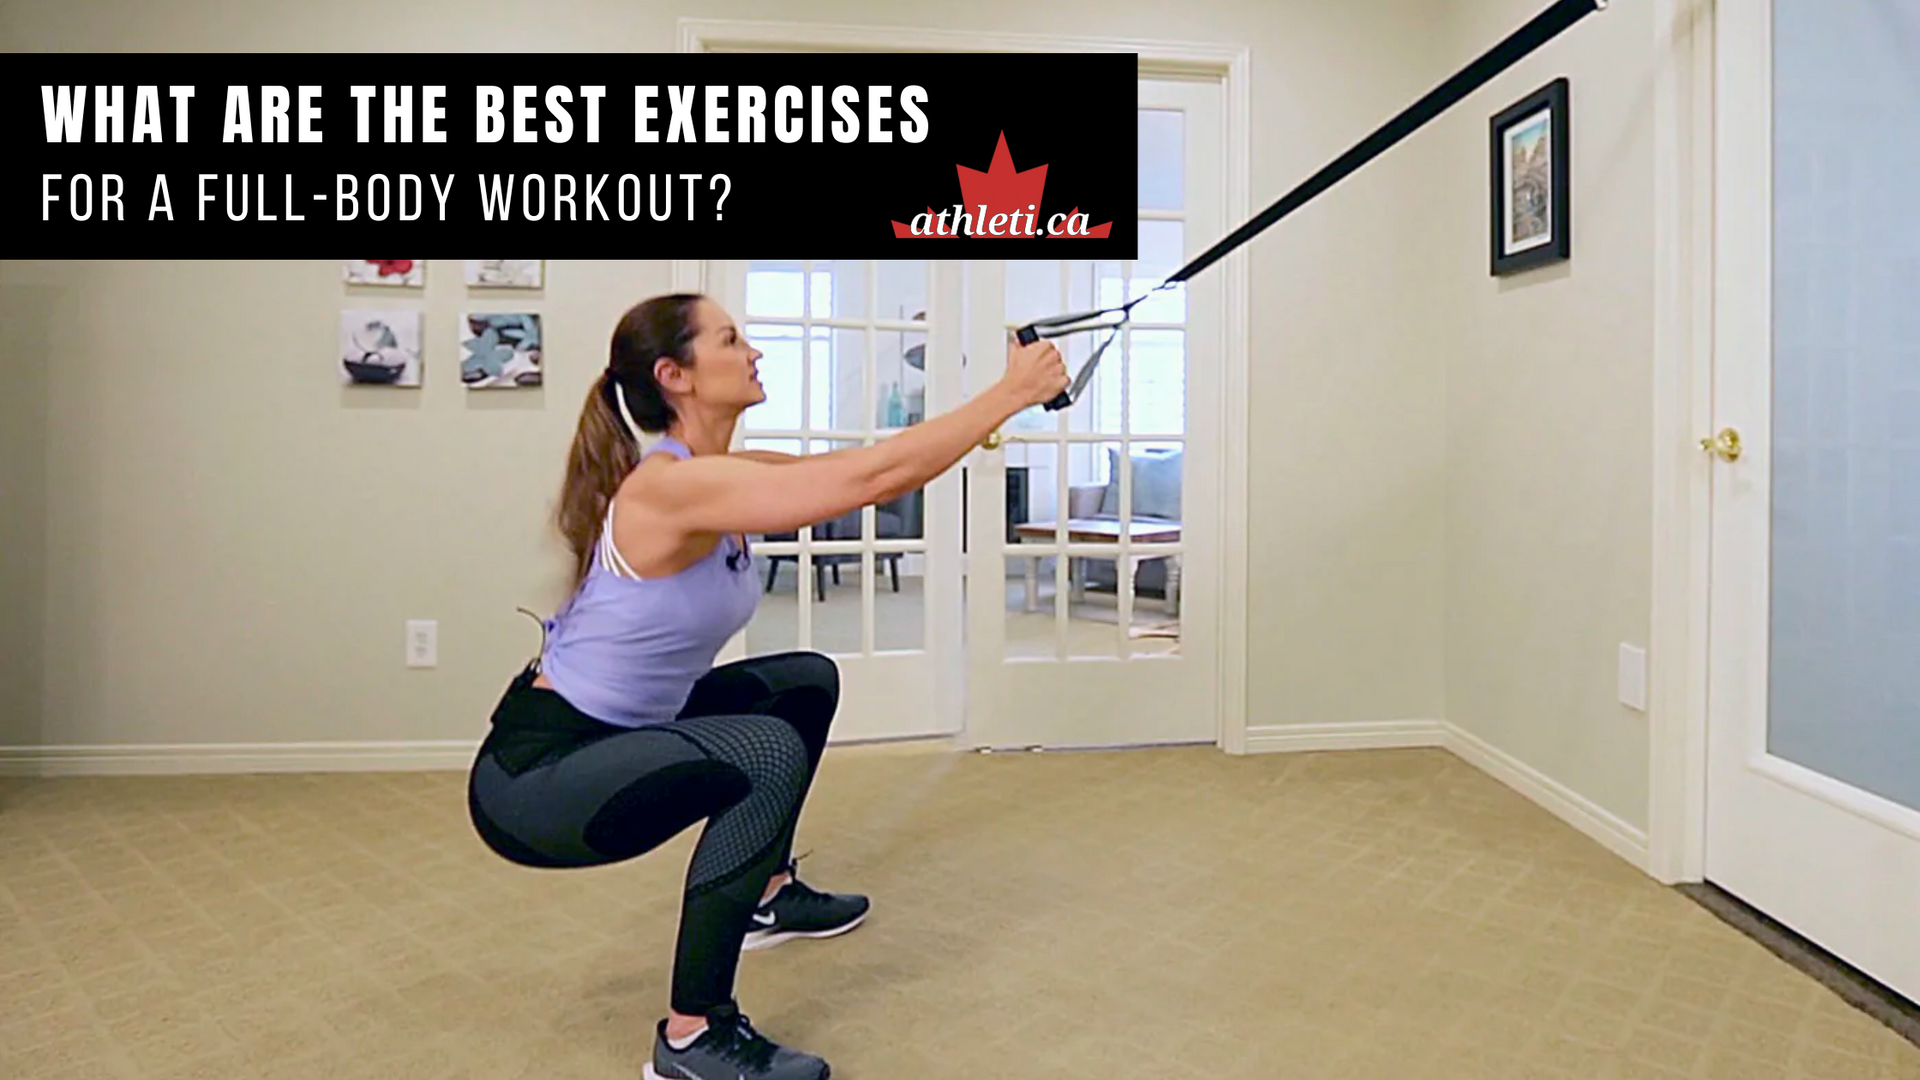 What are the best exercises for a full-body workout?